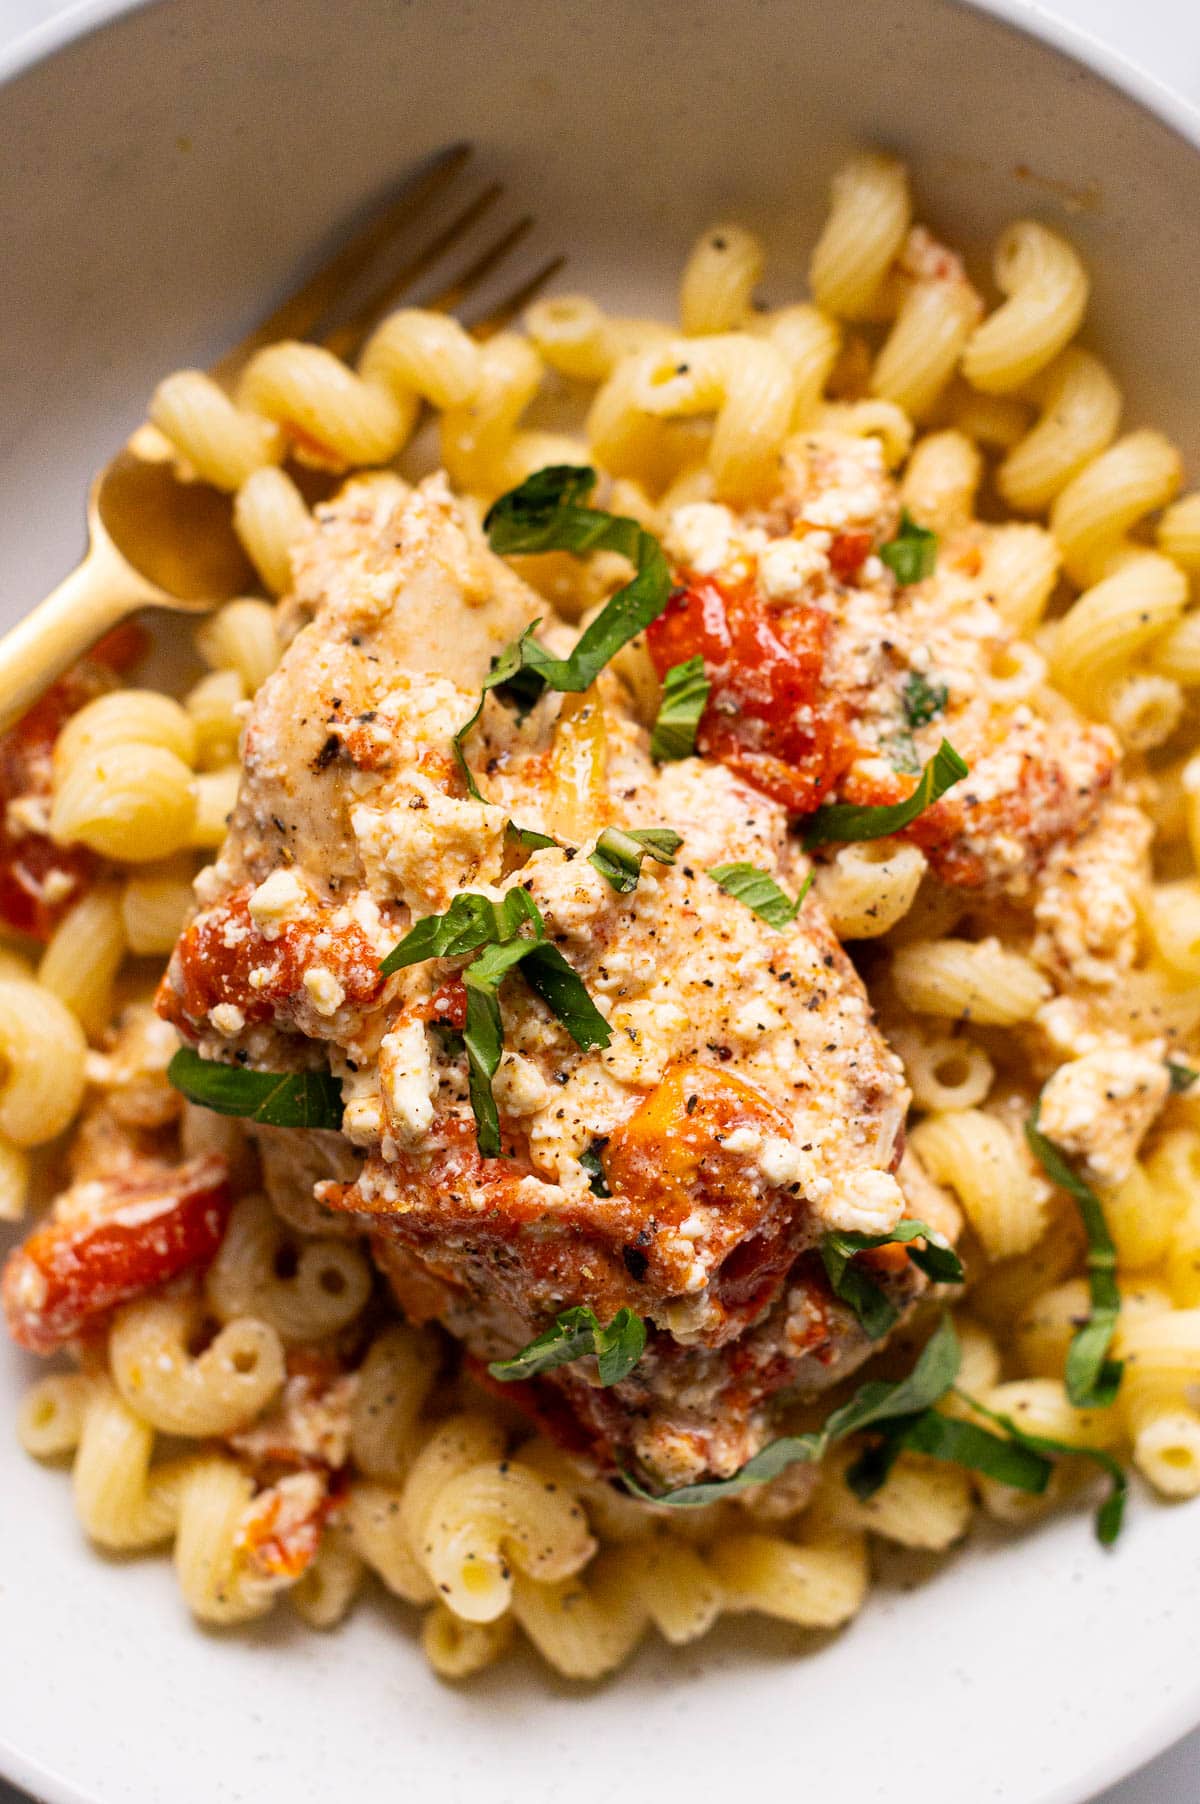 Baked feta chicken served over pasta in a bowl with a fork.